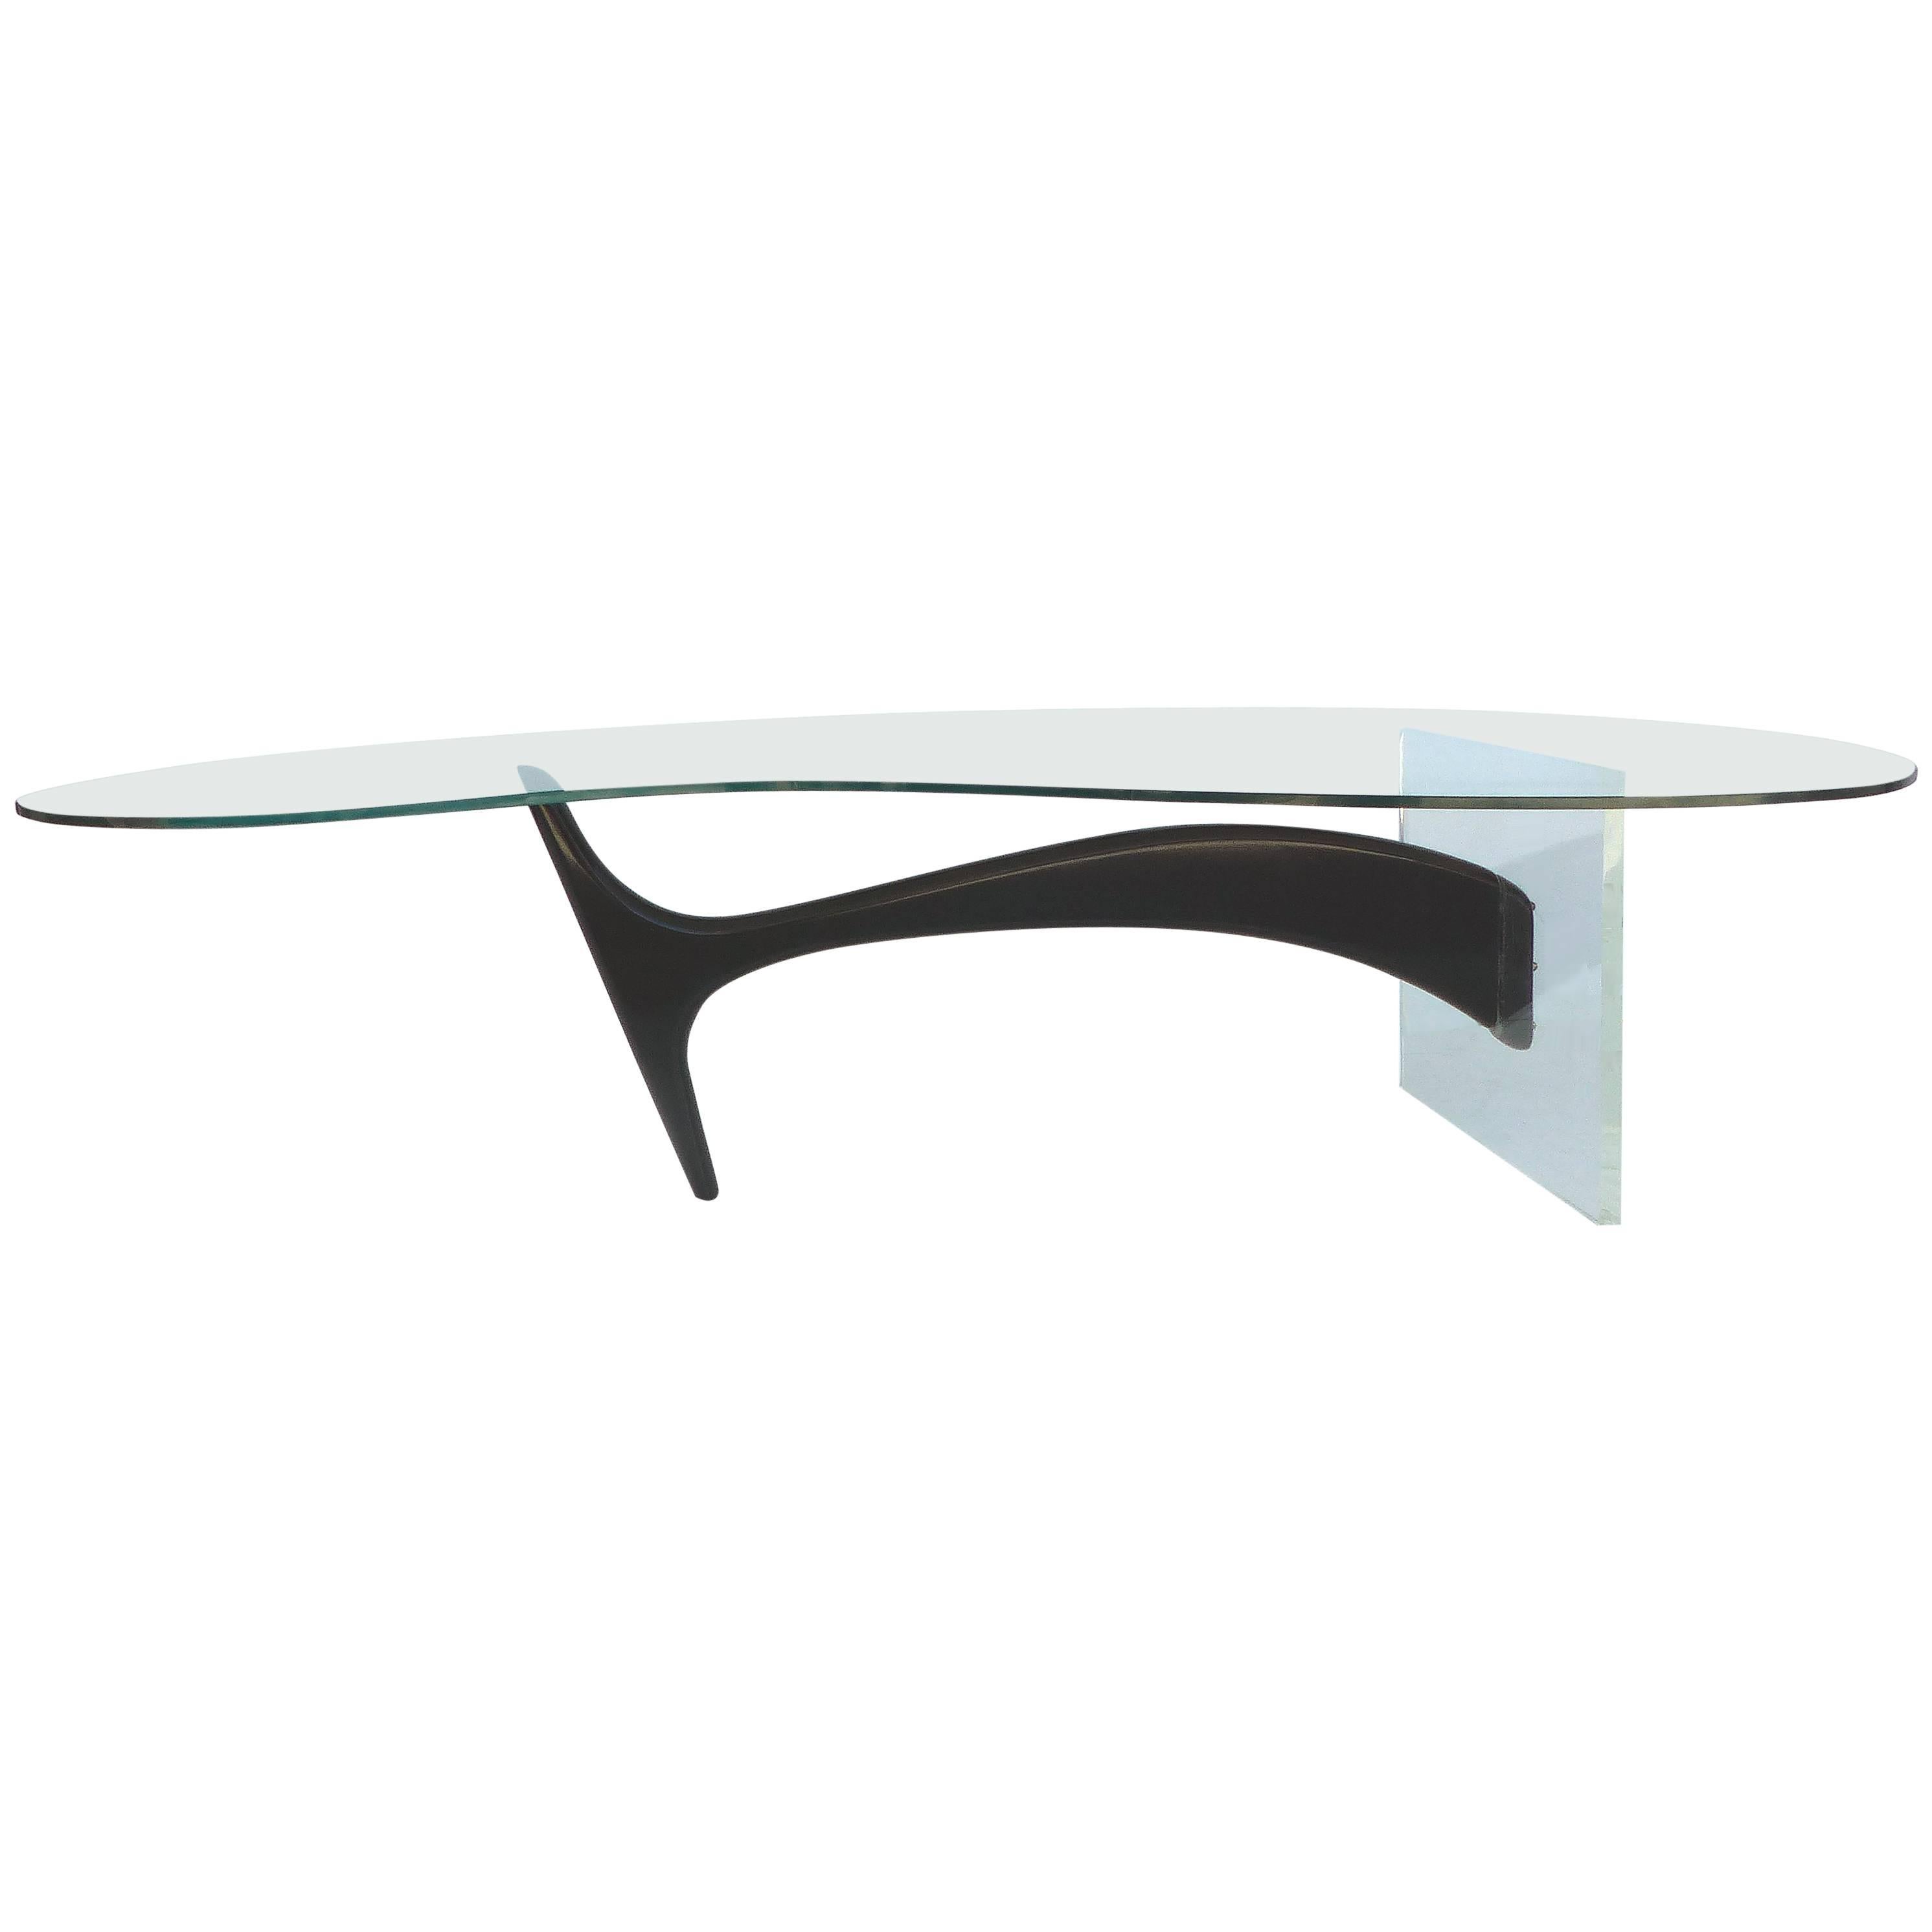 Mid-Century Modern Coffee Table in the Manner of the Kagan Omnibus Collection